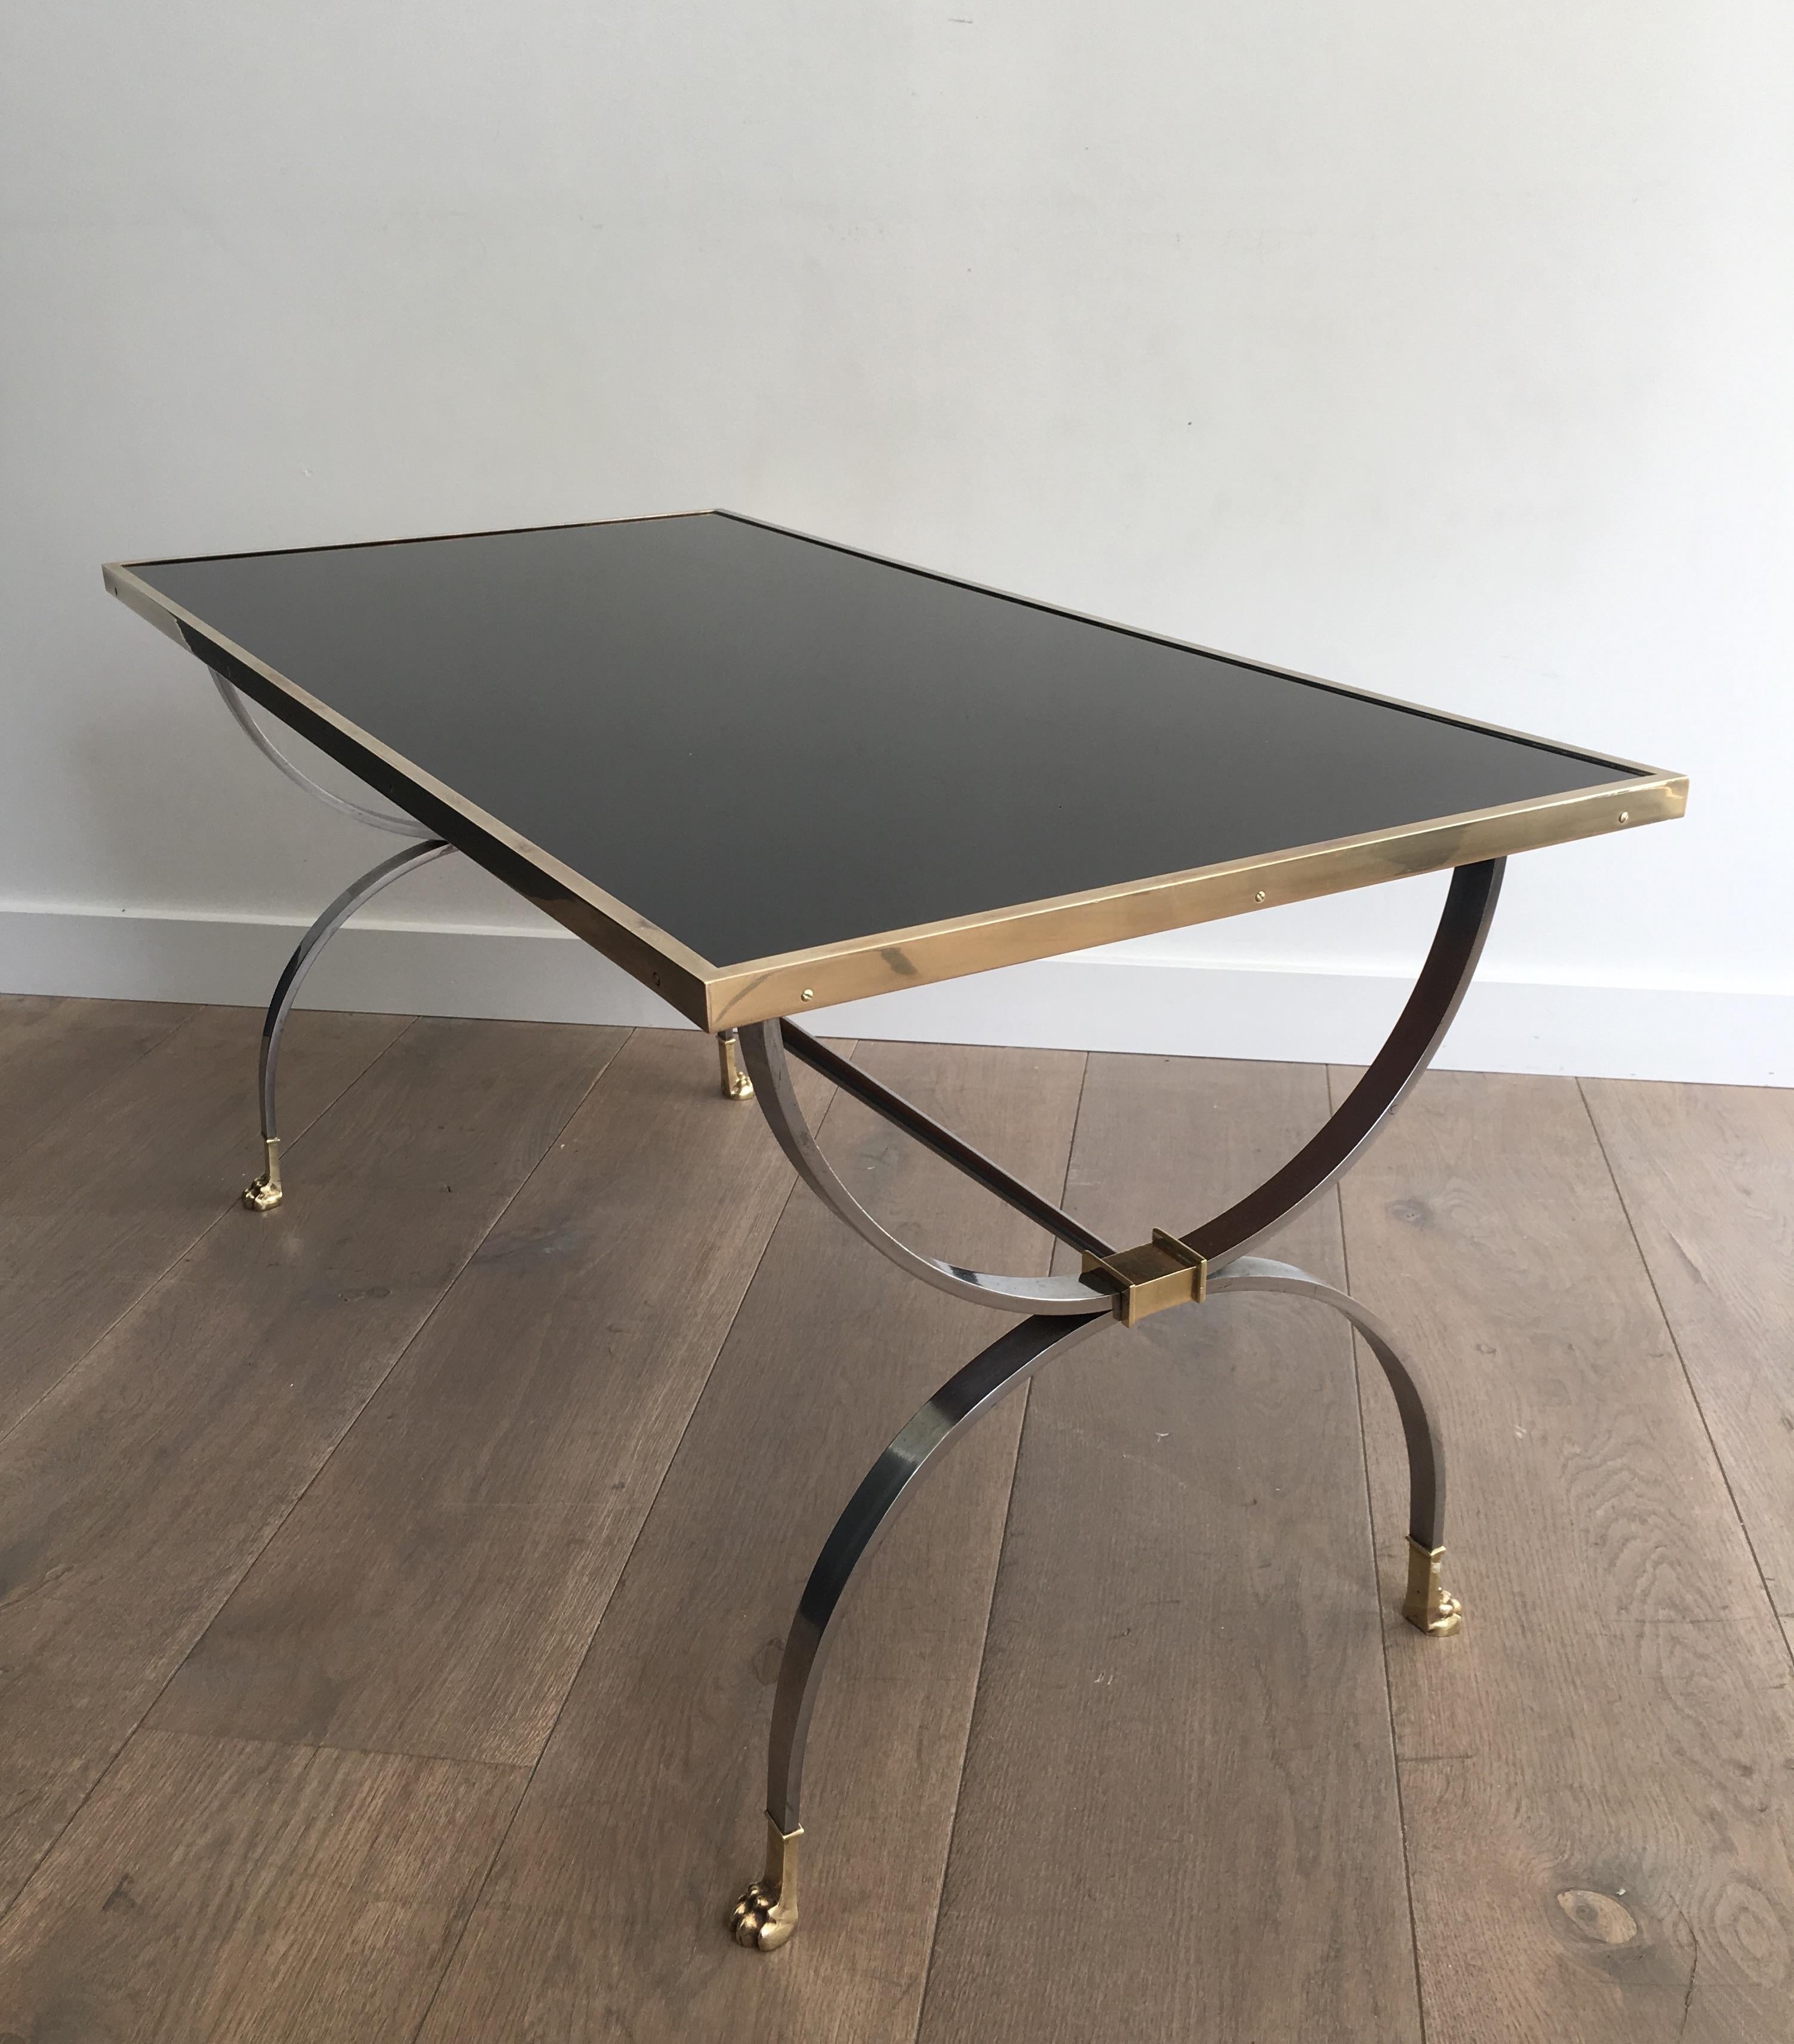 Maison Jansen, Rare Brushed Steel and Brass Neoclassical Style Coffee Table For Sale 12